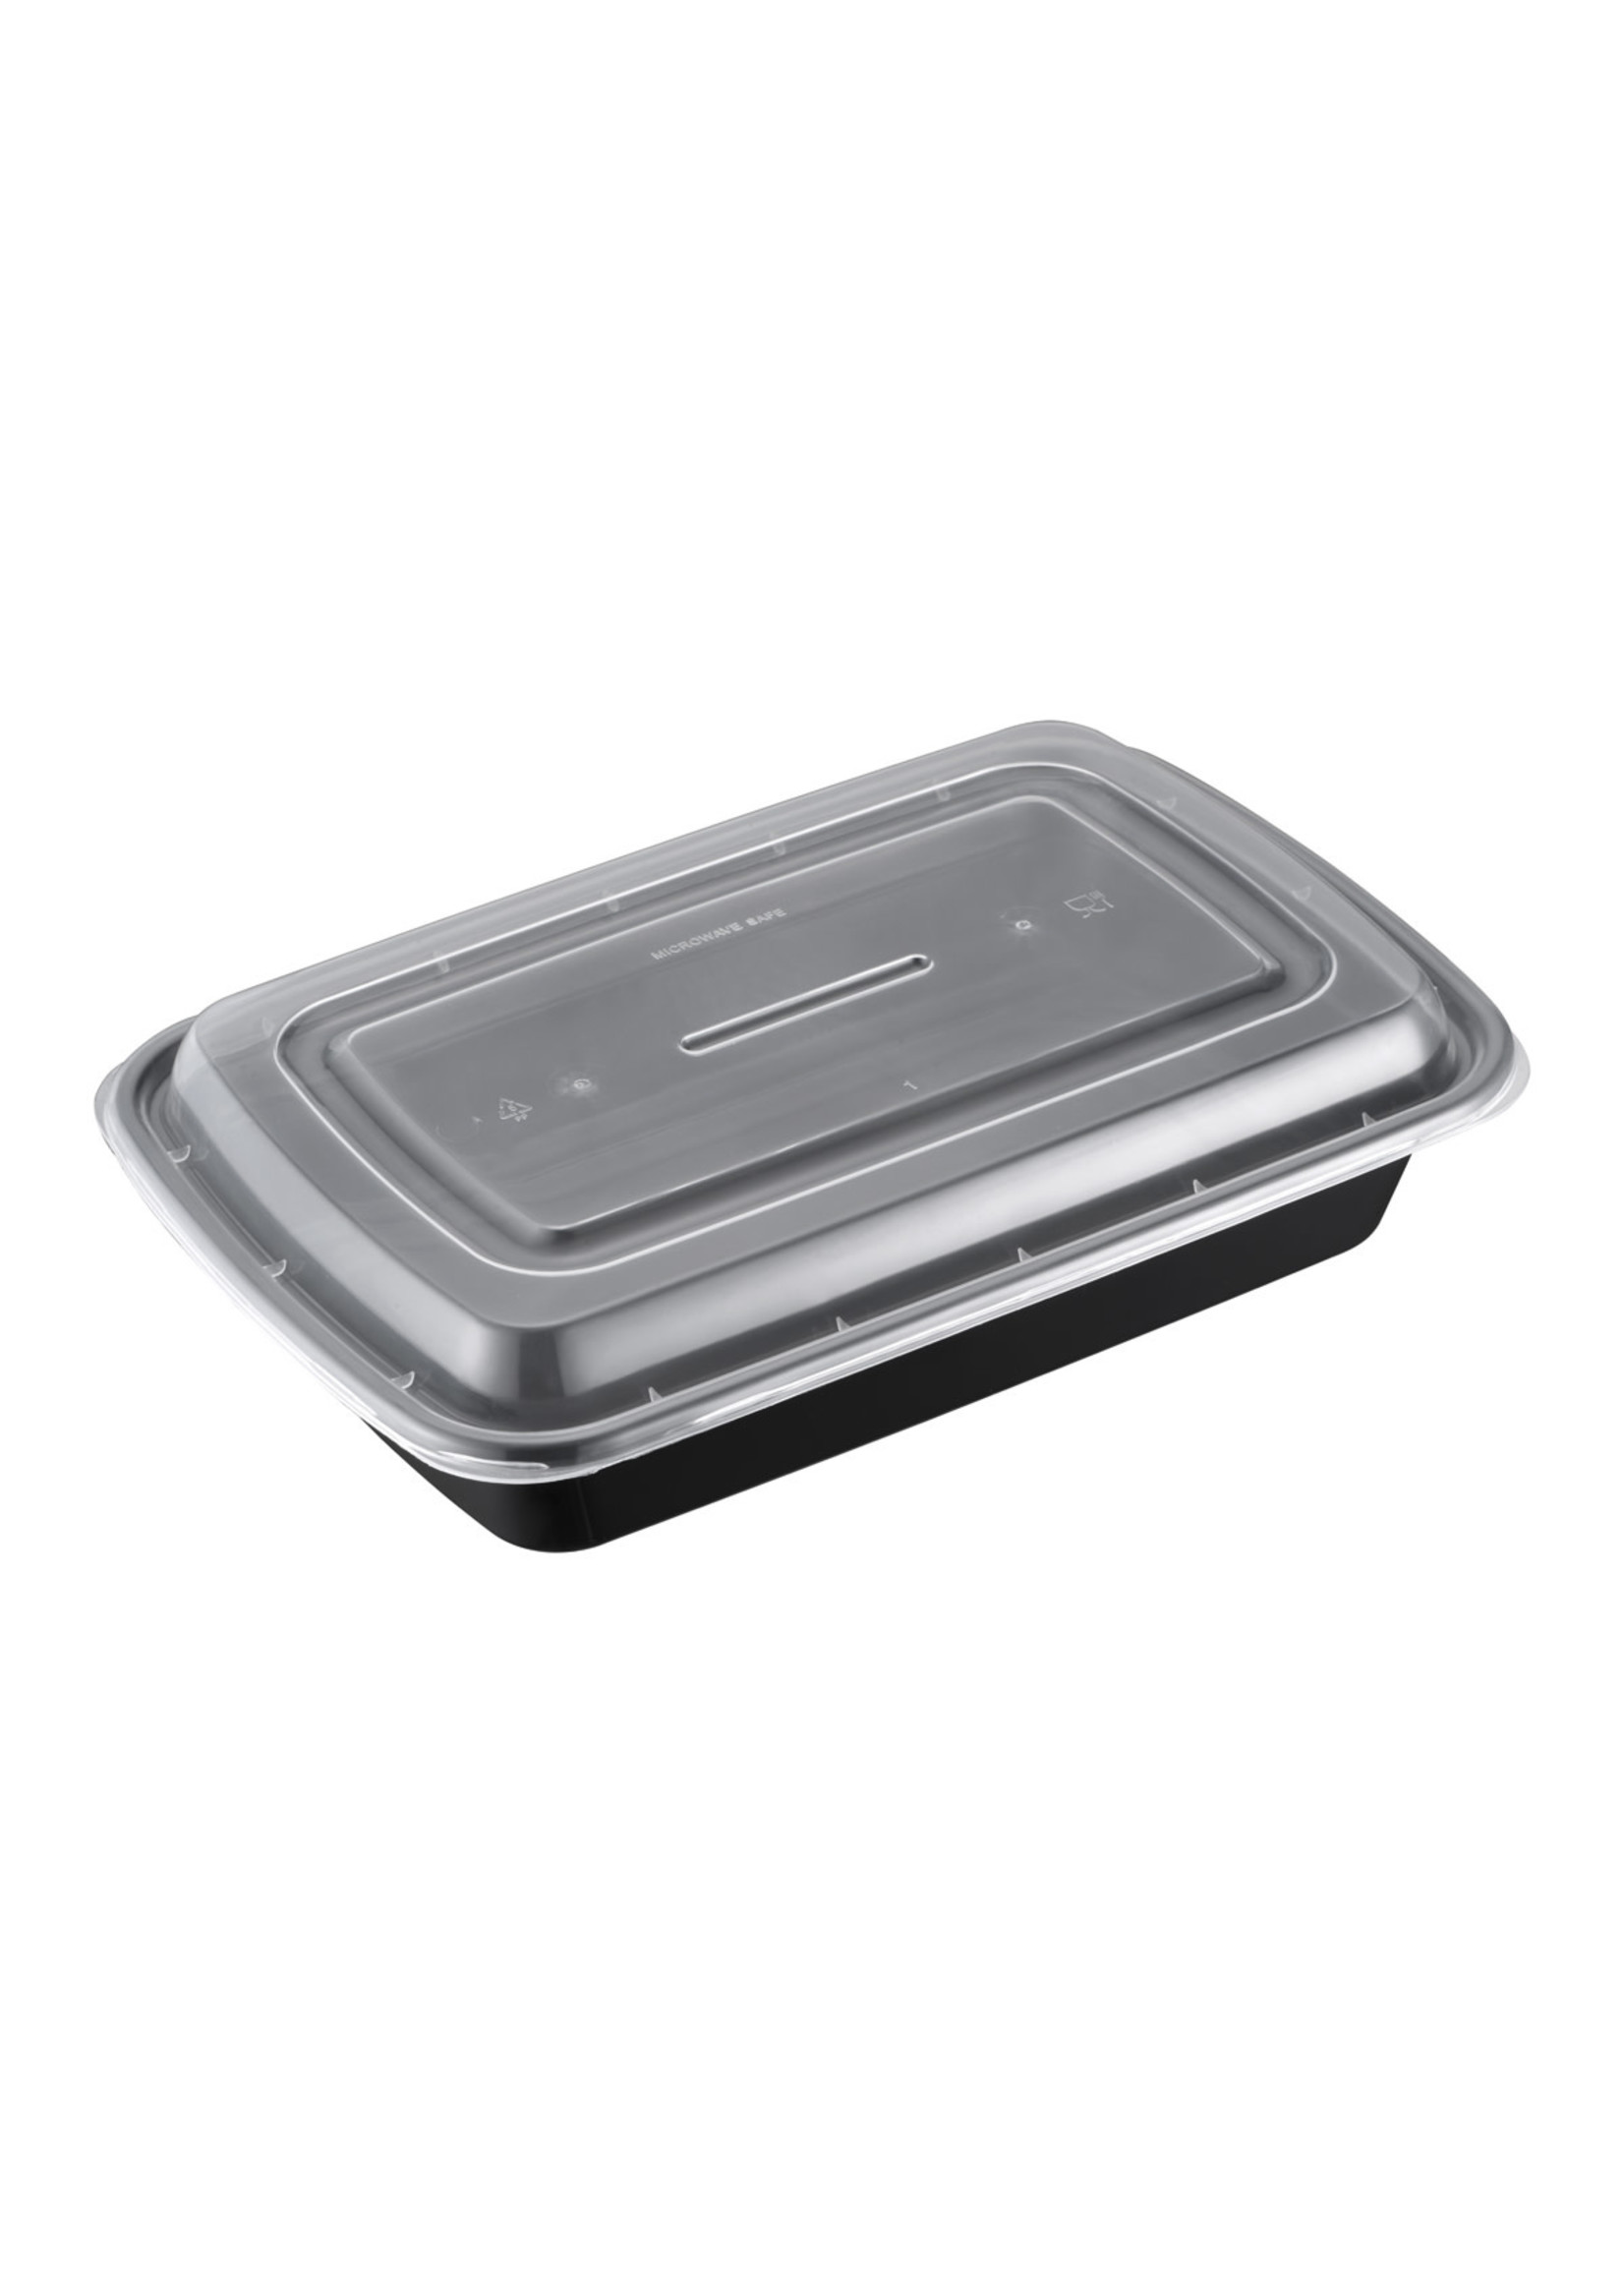 Tiya, Inc. SRC38/E-38 - 38oz Rectangular Microwavable Container with Lid, 150 sets